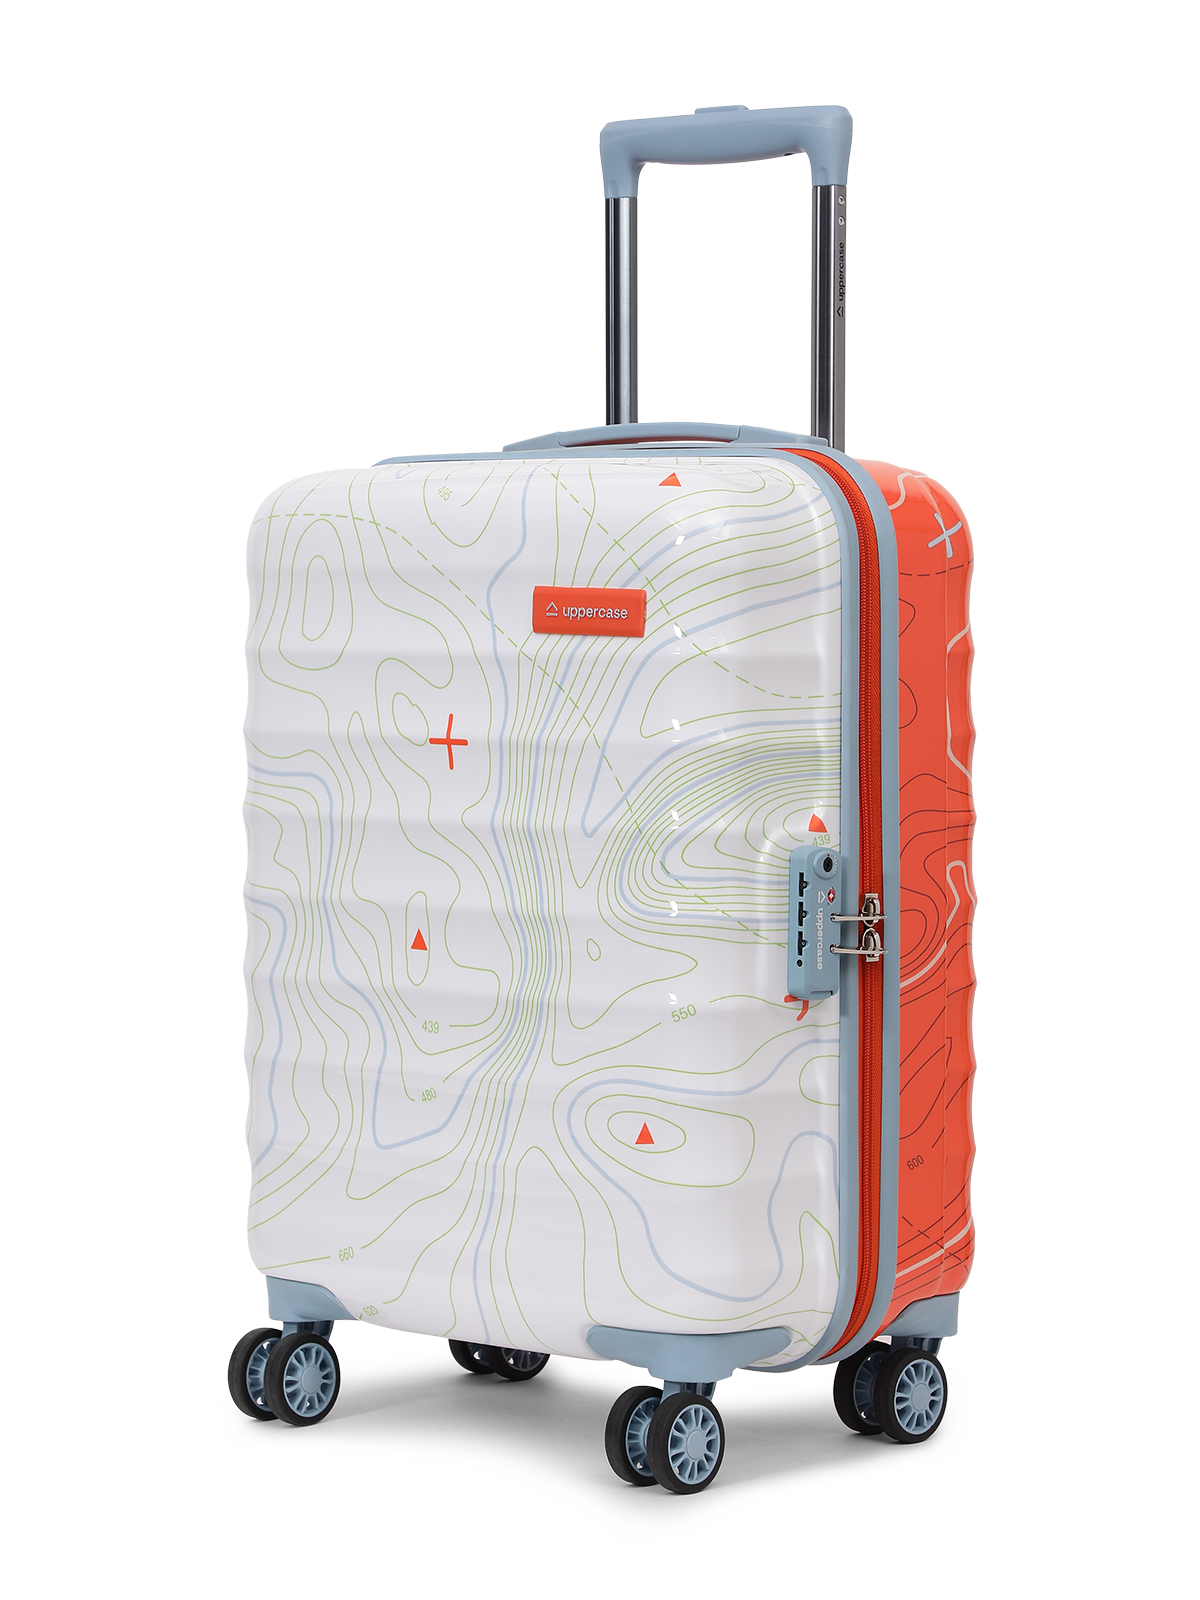 A.K. Luggage Small Cabin Luggage - Antiscratch Trolley Bag Polyester Travel  Suitcase Expandable Cabin Suitcase 2 Wheels - 21 inch Red - Price in India  | Flipkart.com